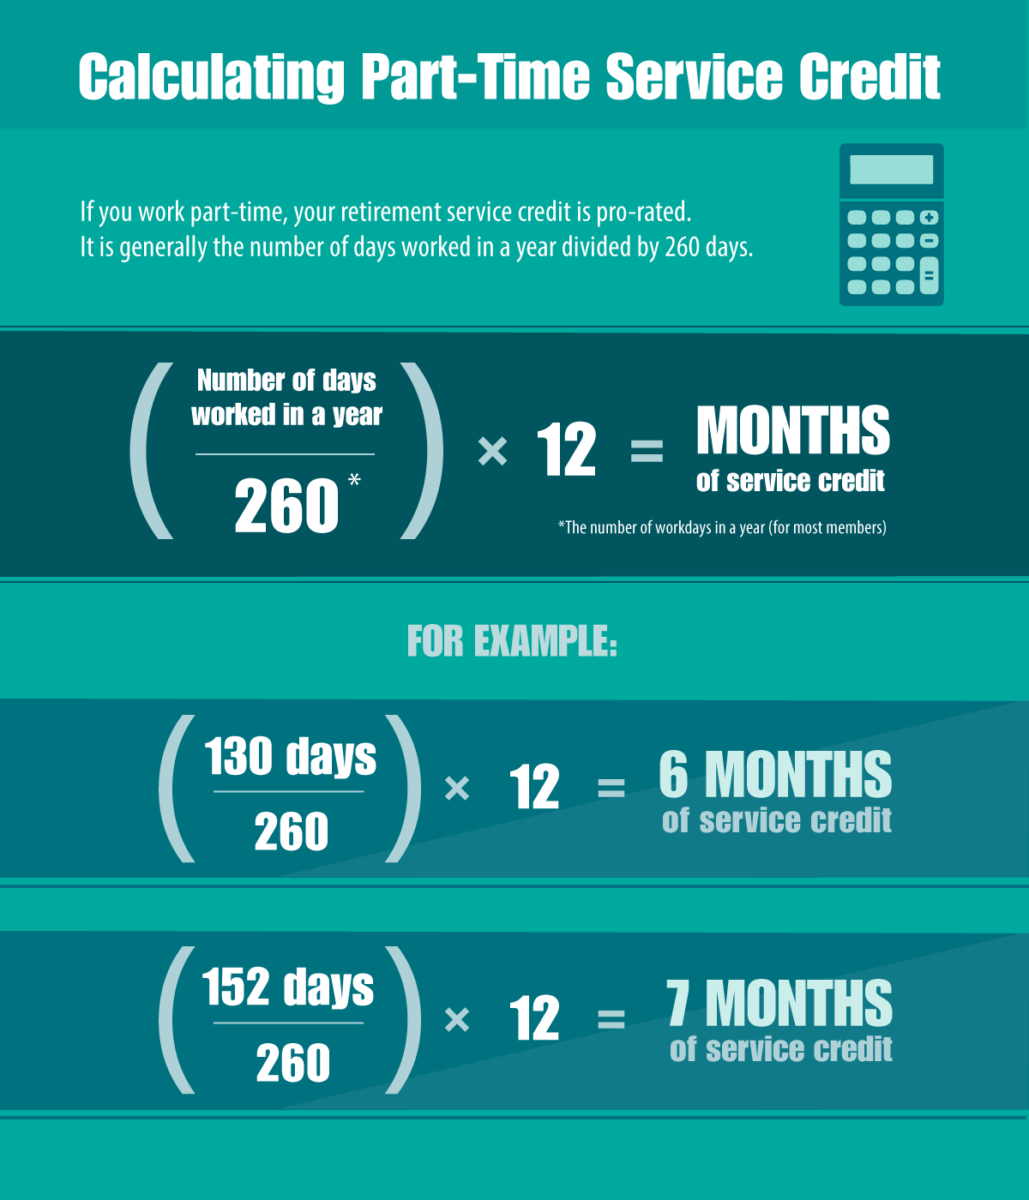 How Part-Time Service Credit Works